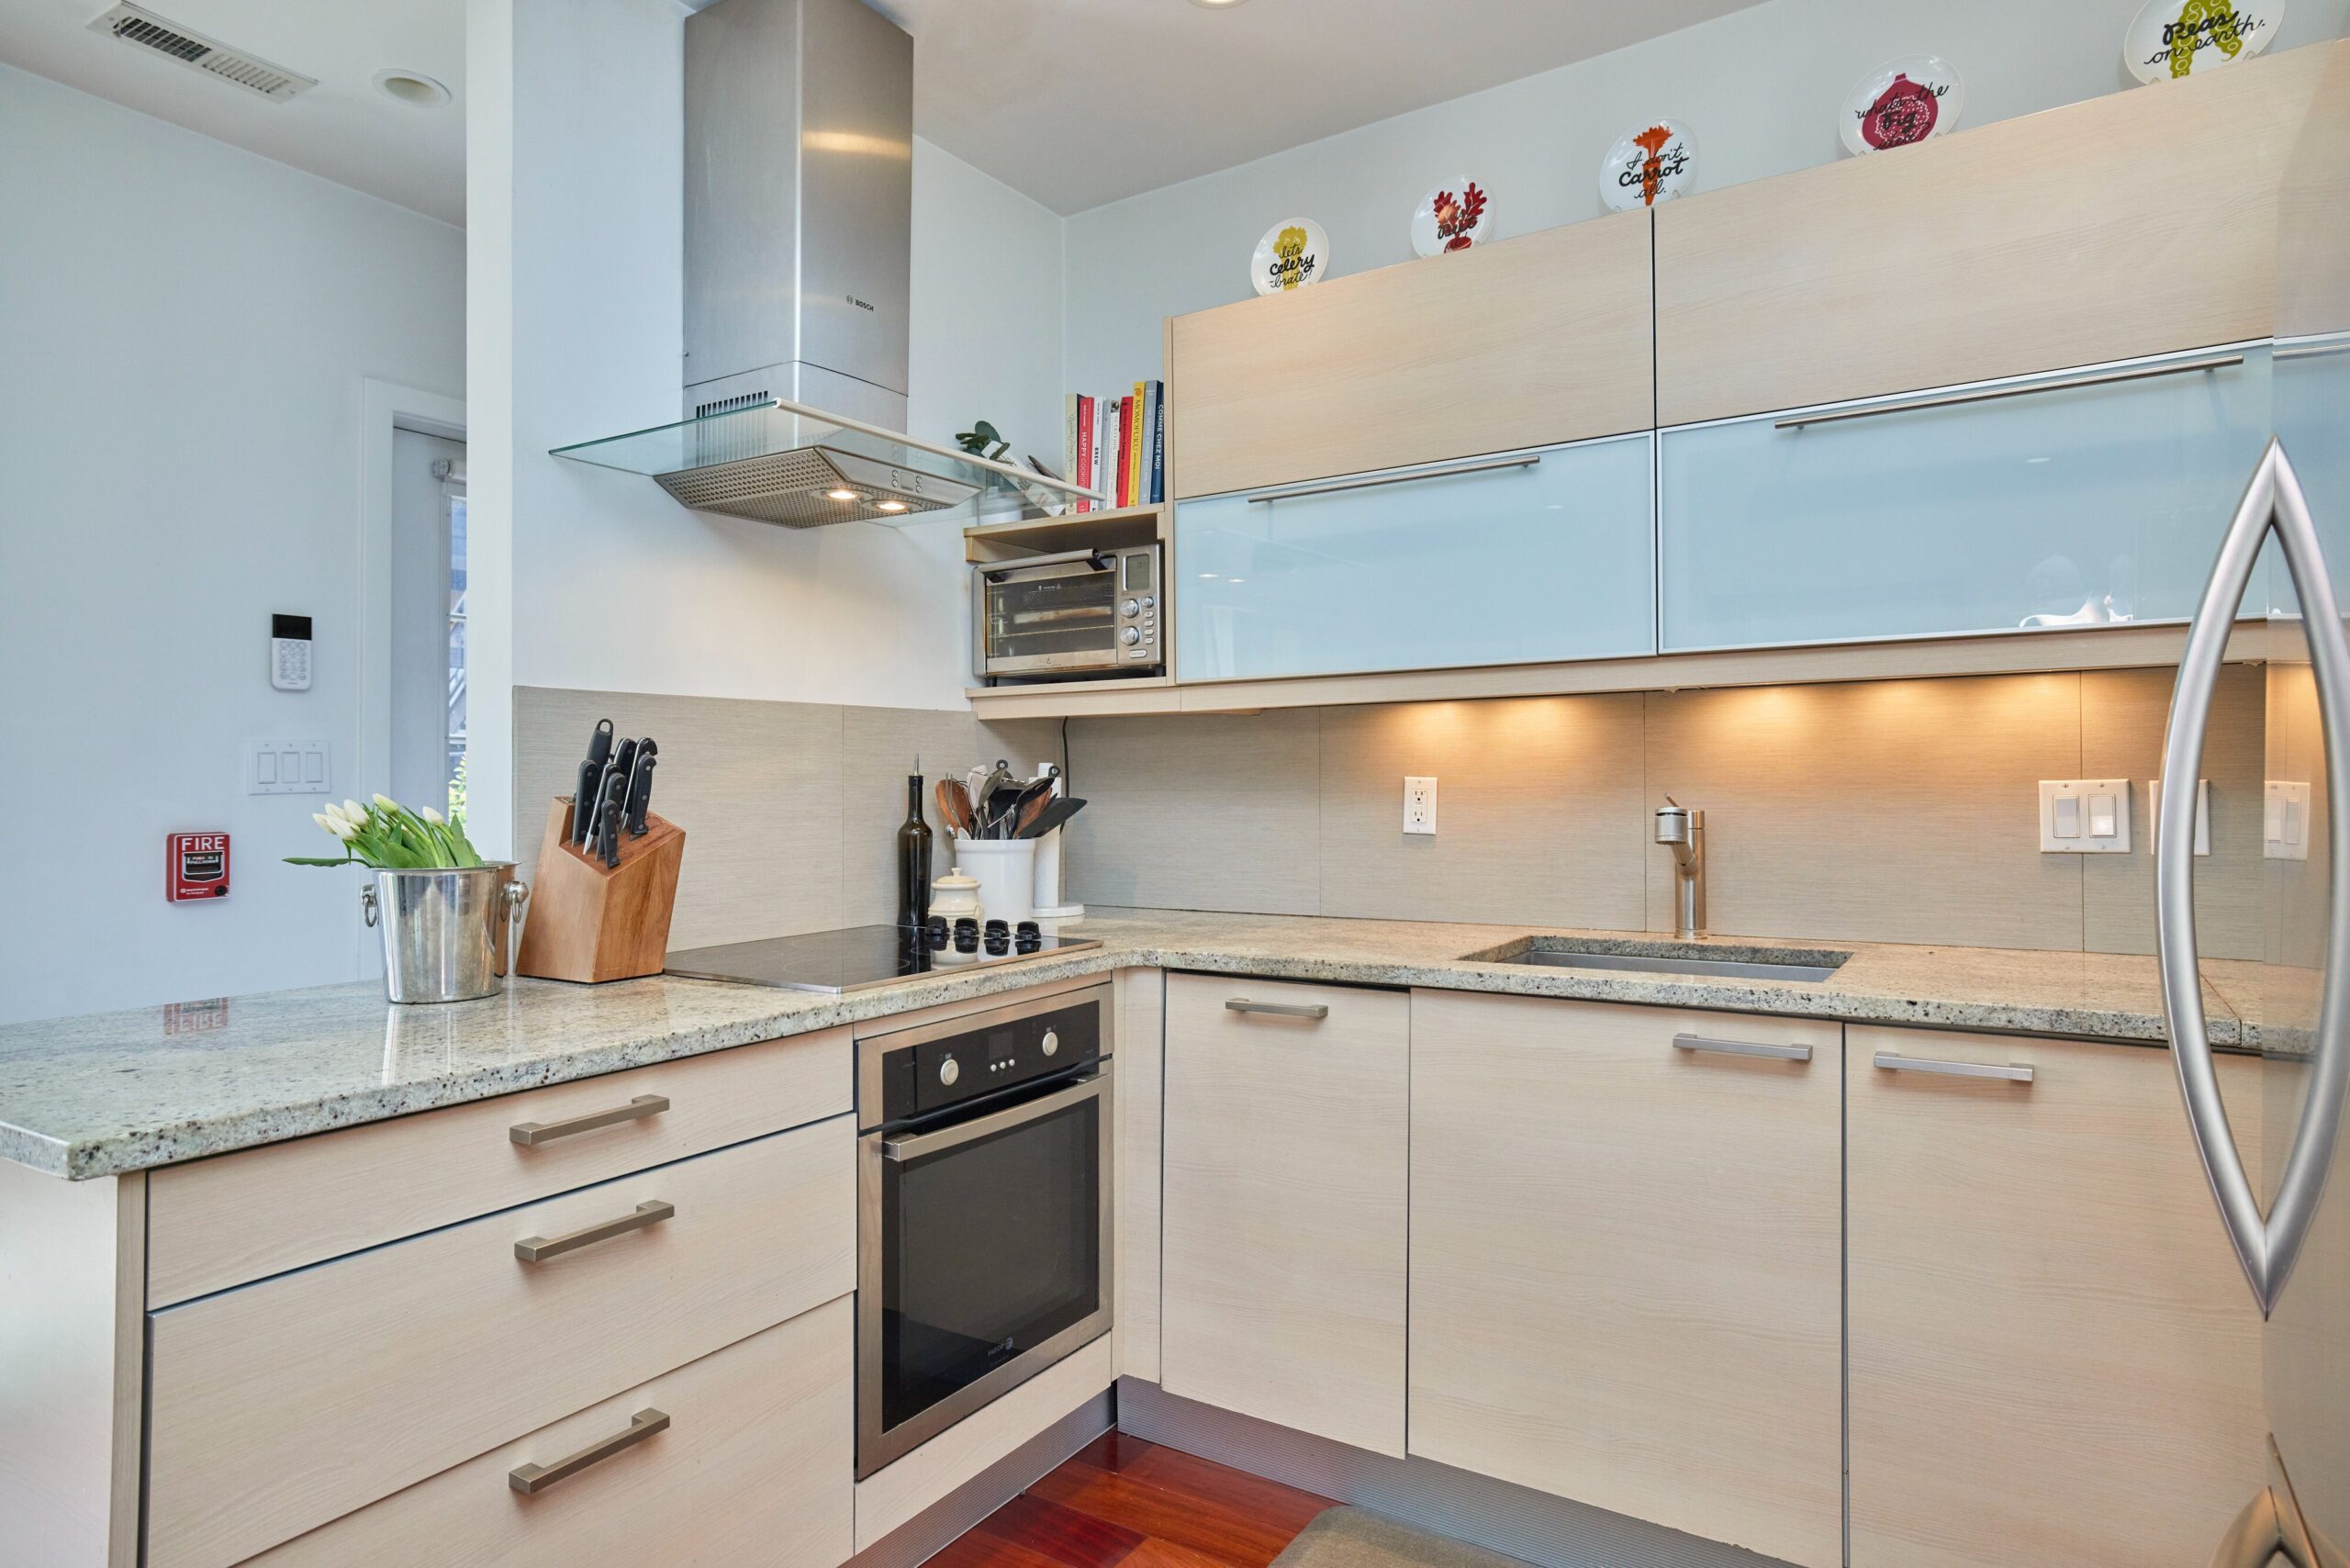 Professional interior photo of 1459 Harvard St NW #6 - showing the kitchen with beige cabinets, granite counters and stainless built-in appliances